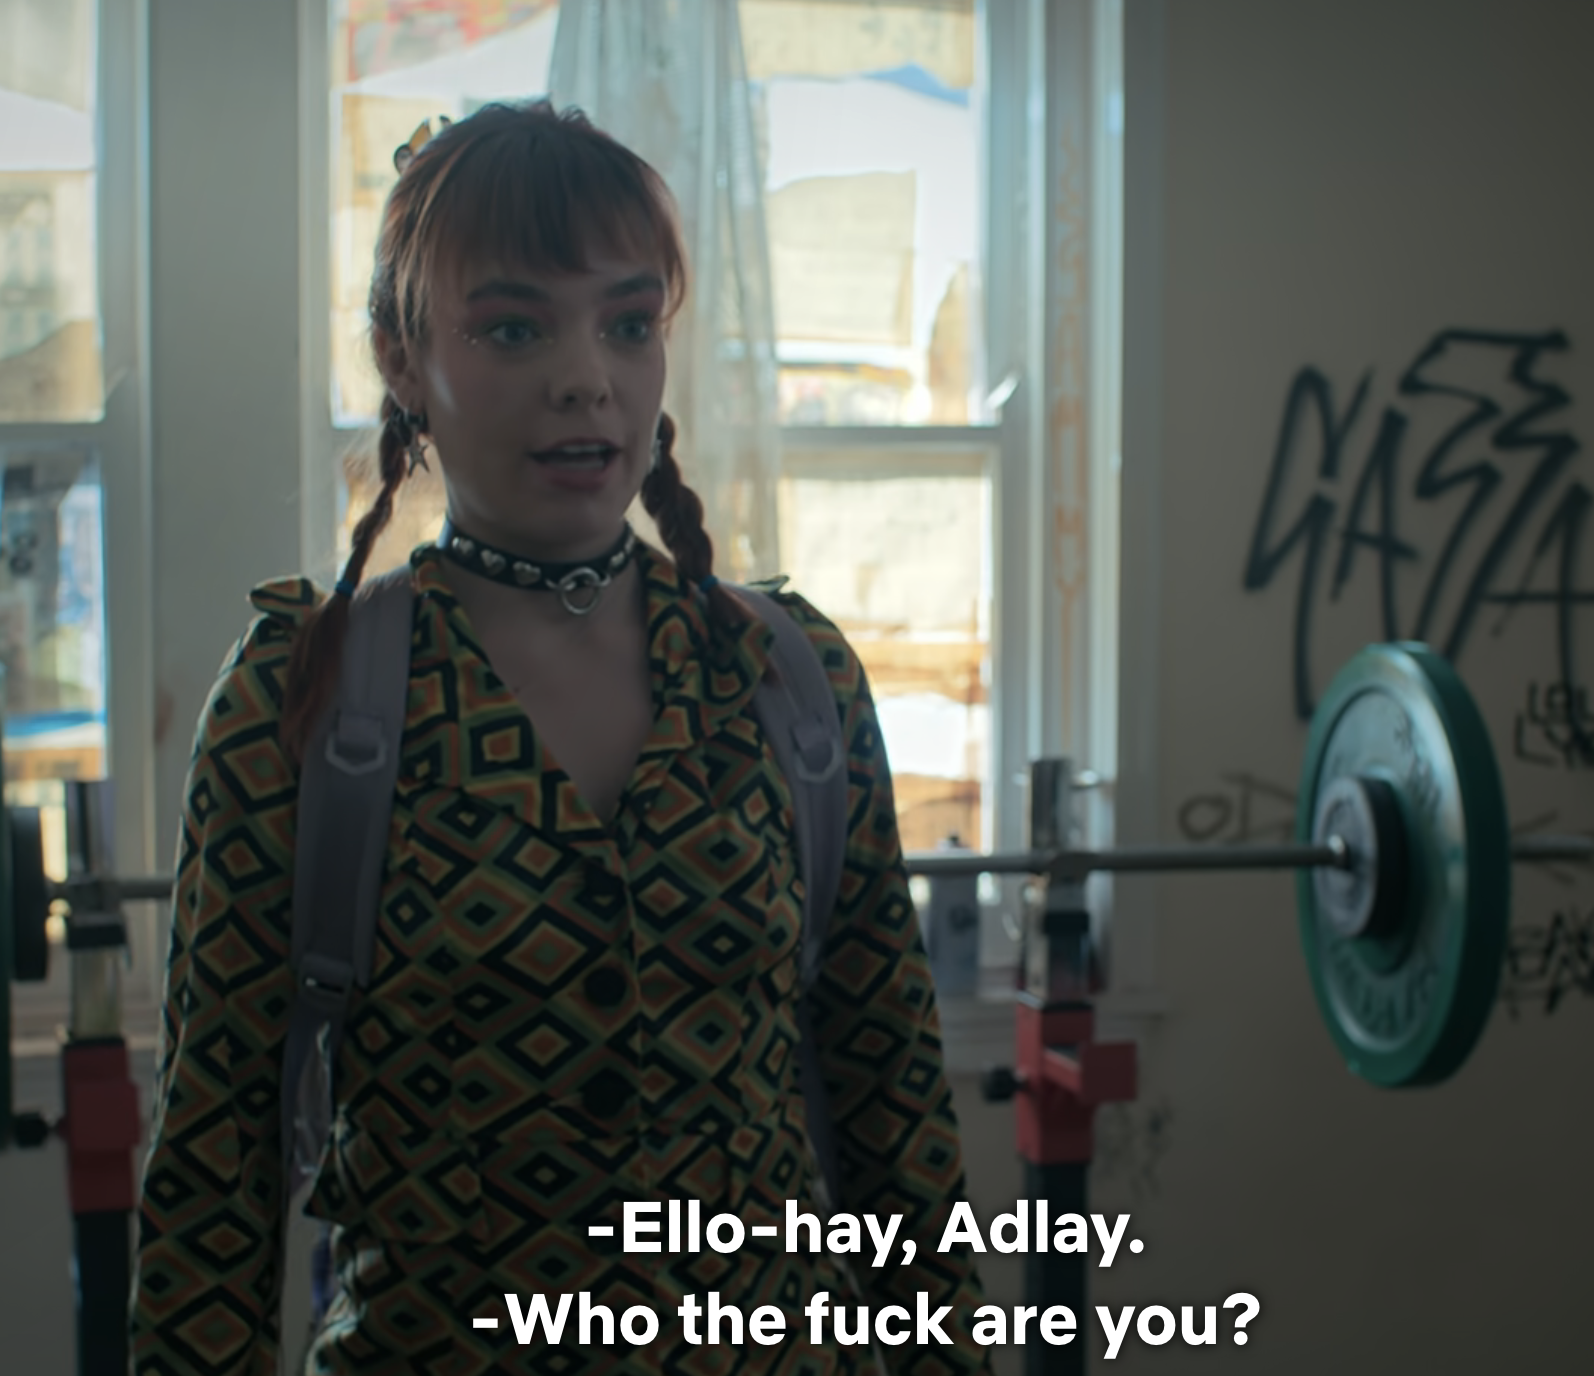 Eddie from Stranger Things is surprised in a cluttered room, with graffiti and exercise equipment